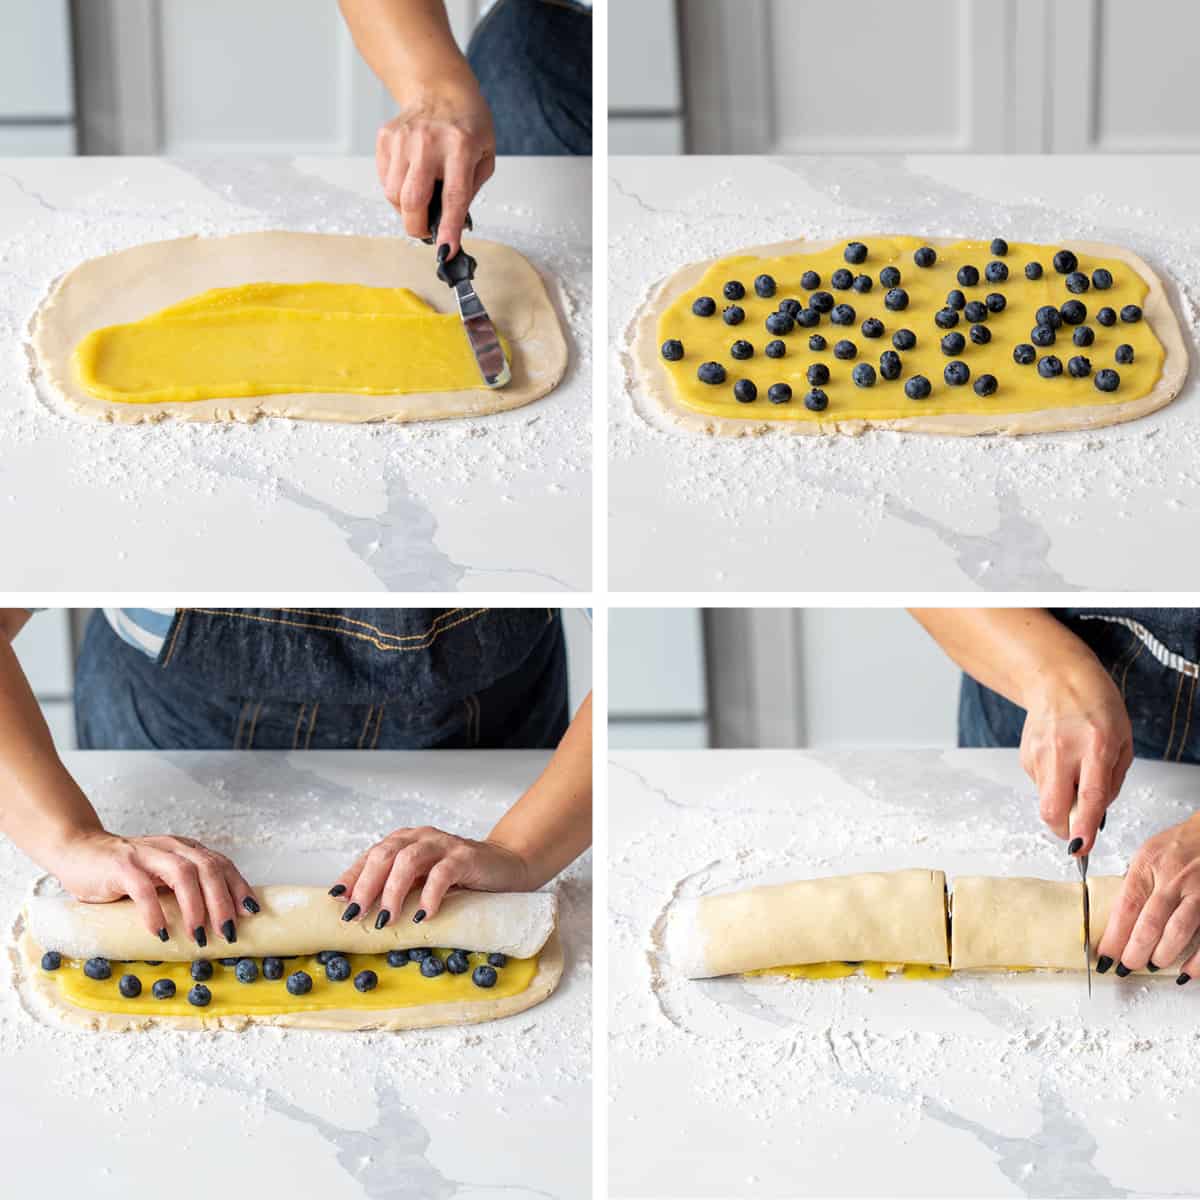 Stesp for Rolling out Dough, Adding Lemon Curd, Blueberries, and then Rolling and Cutting into Rolls to Make Blueberry Lemon Skillet Rolls.